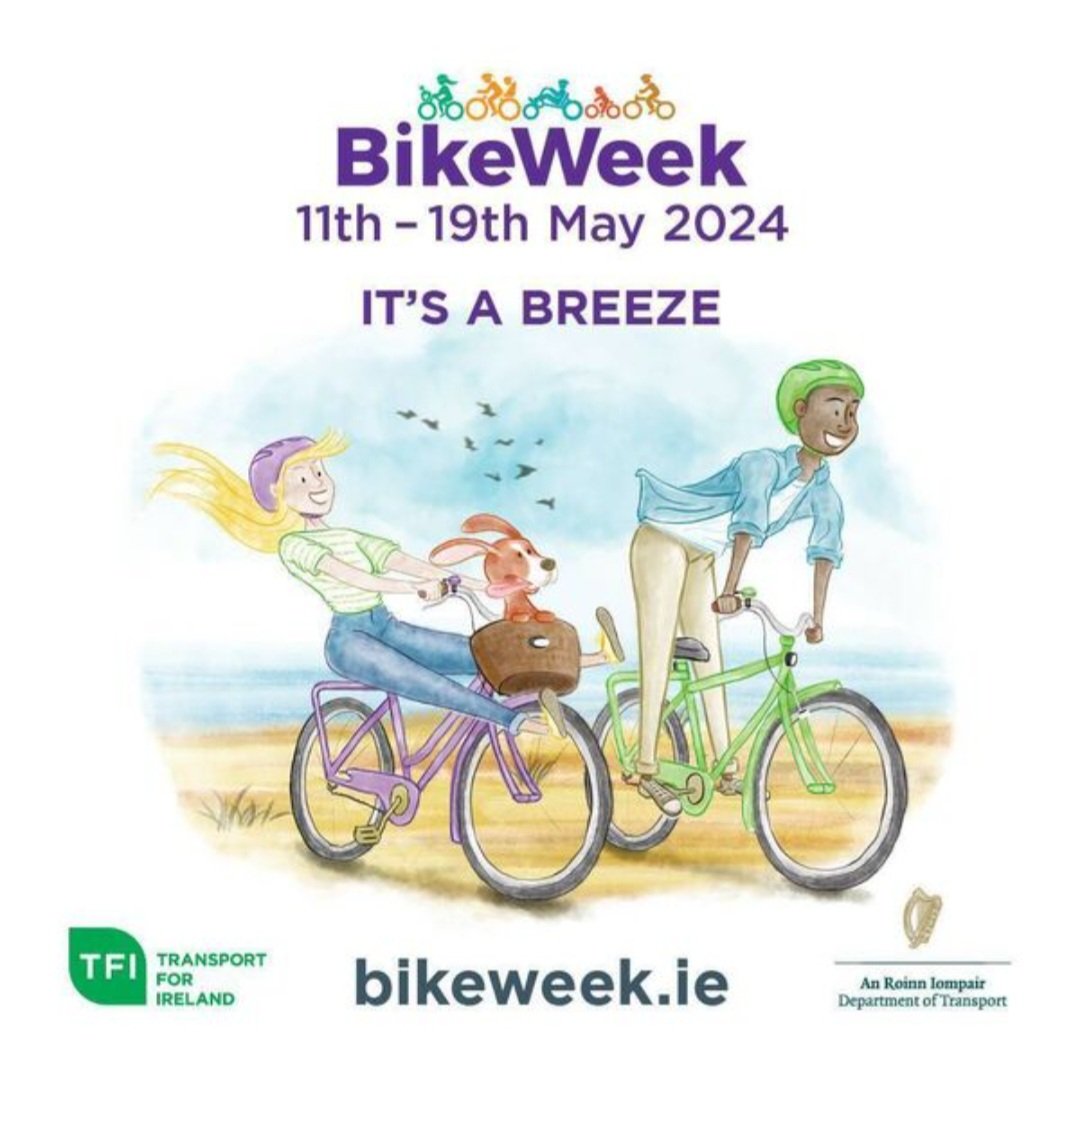 To celebrate Bike Week 11th -19th May, we will be taking part in National COW Day (Cycle on Wednesday) on Wednesday 15th May. We encourage as many people to cycle to school as possible 🚲 We will be doing lots of other fun cycling activities at school this week too 🤗 #bikeweek